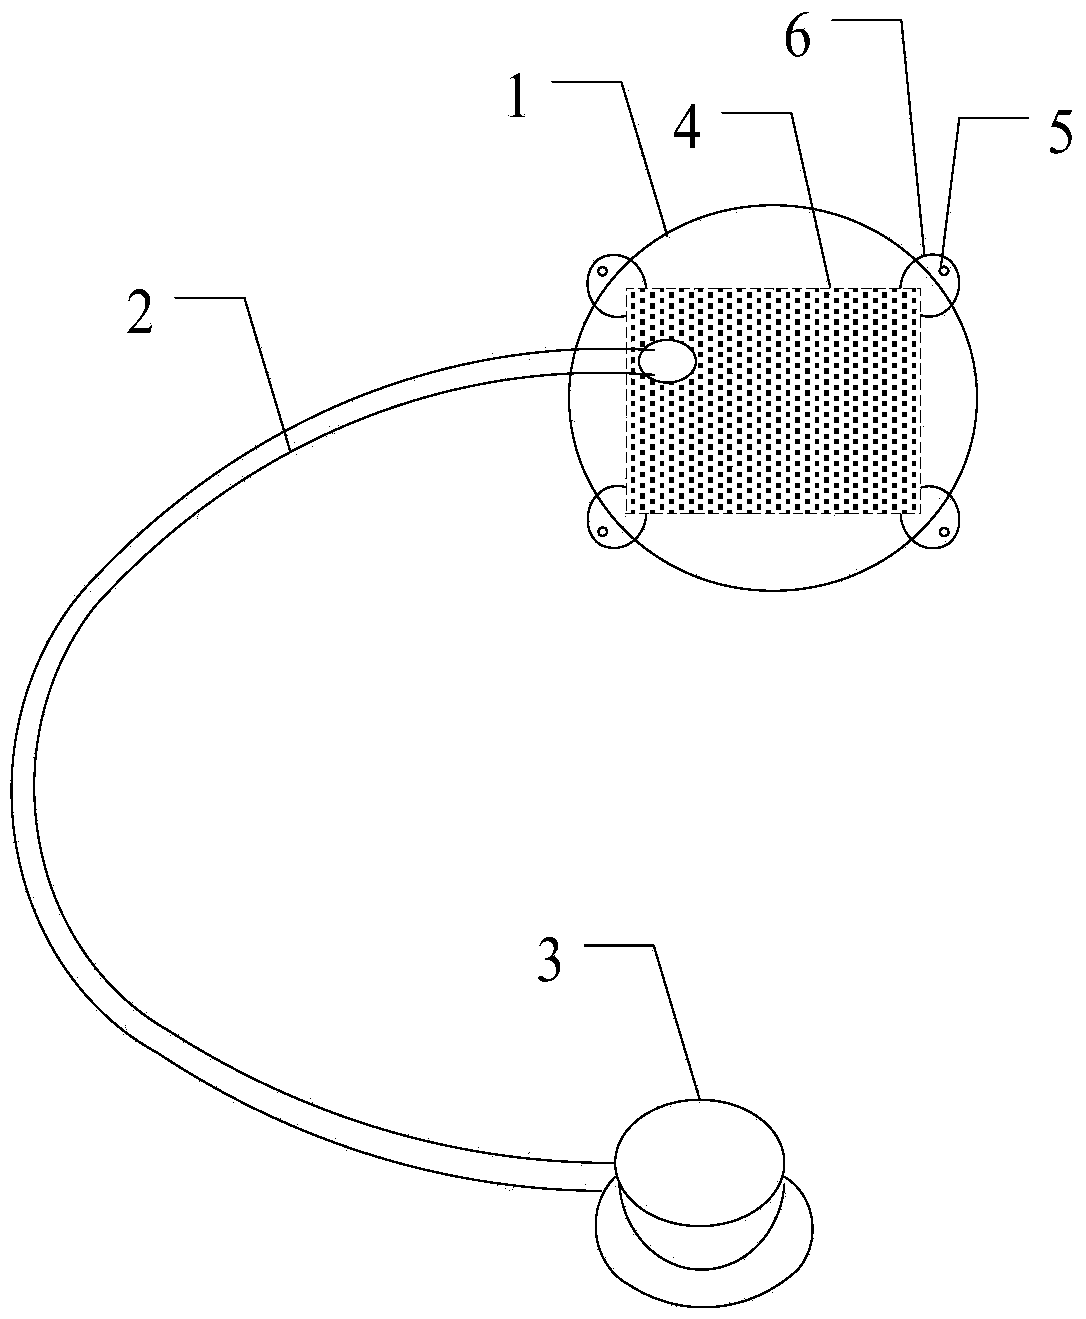 Soft tissue expander with displacement preventing and directional expansion functions